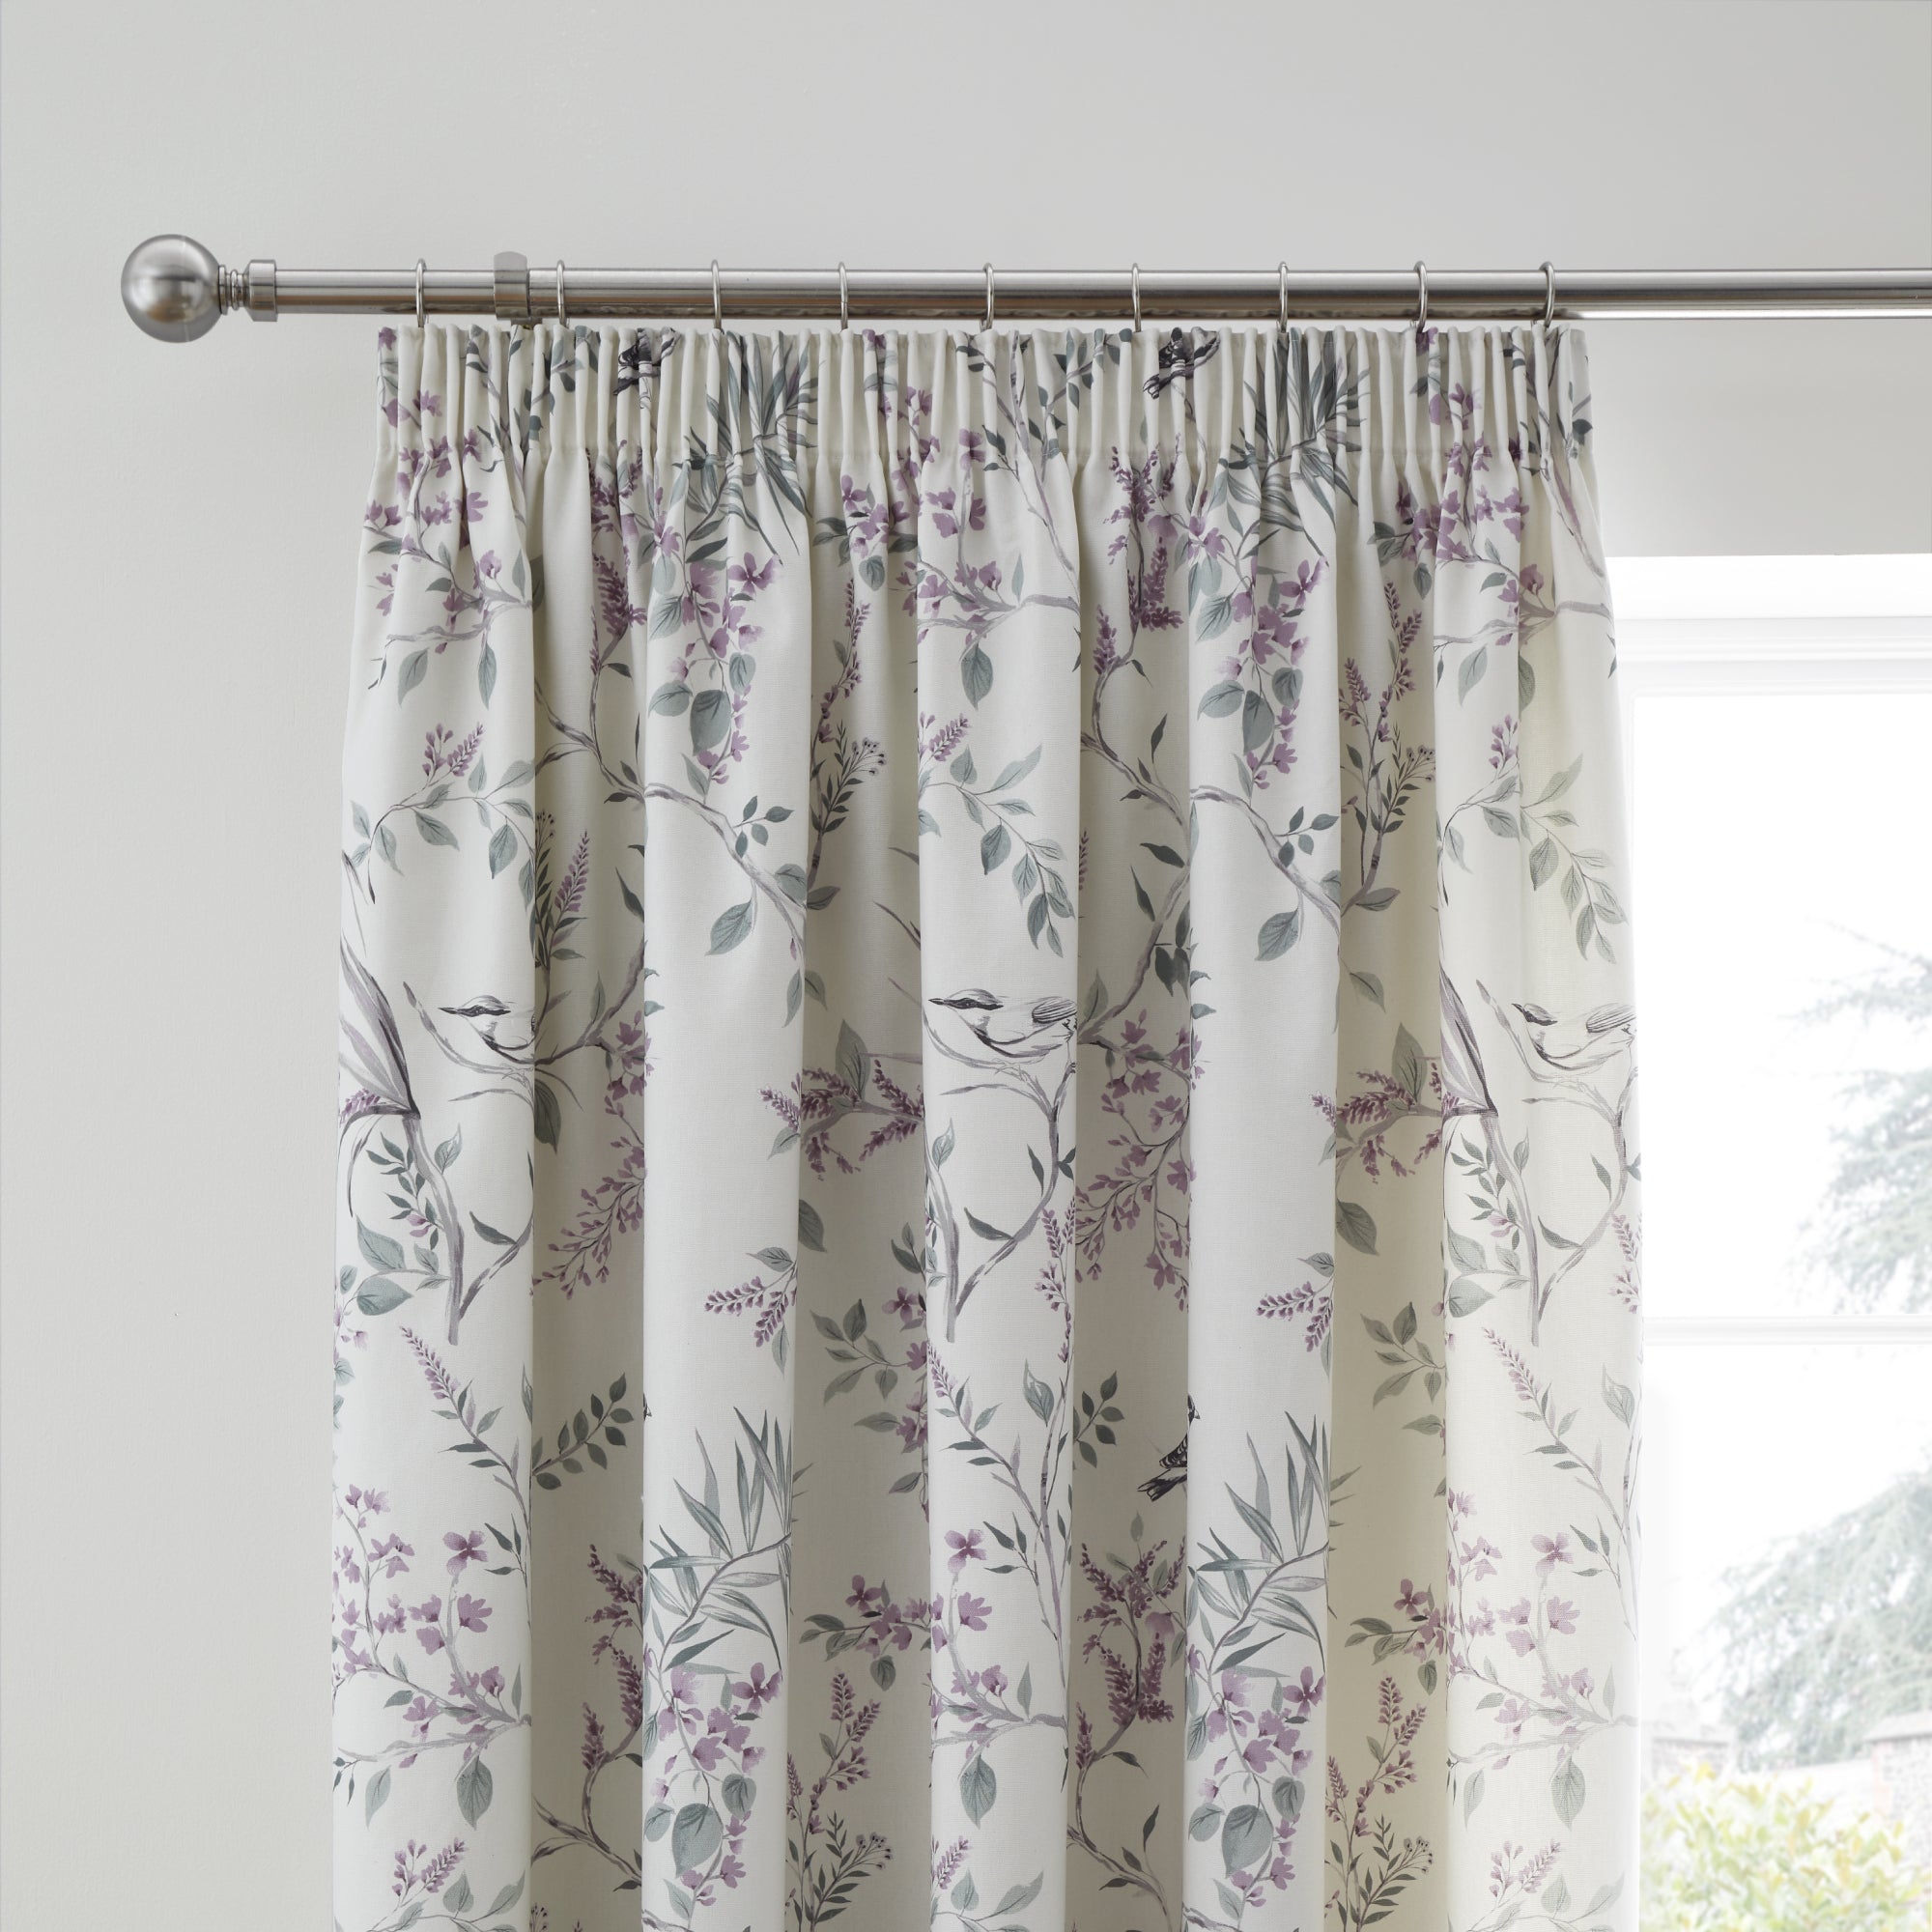 Pair of Pencil Pleat Curtains With Tie-Backs Jazmine by Dreams & Drapes Design in Heather